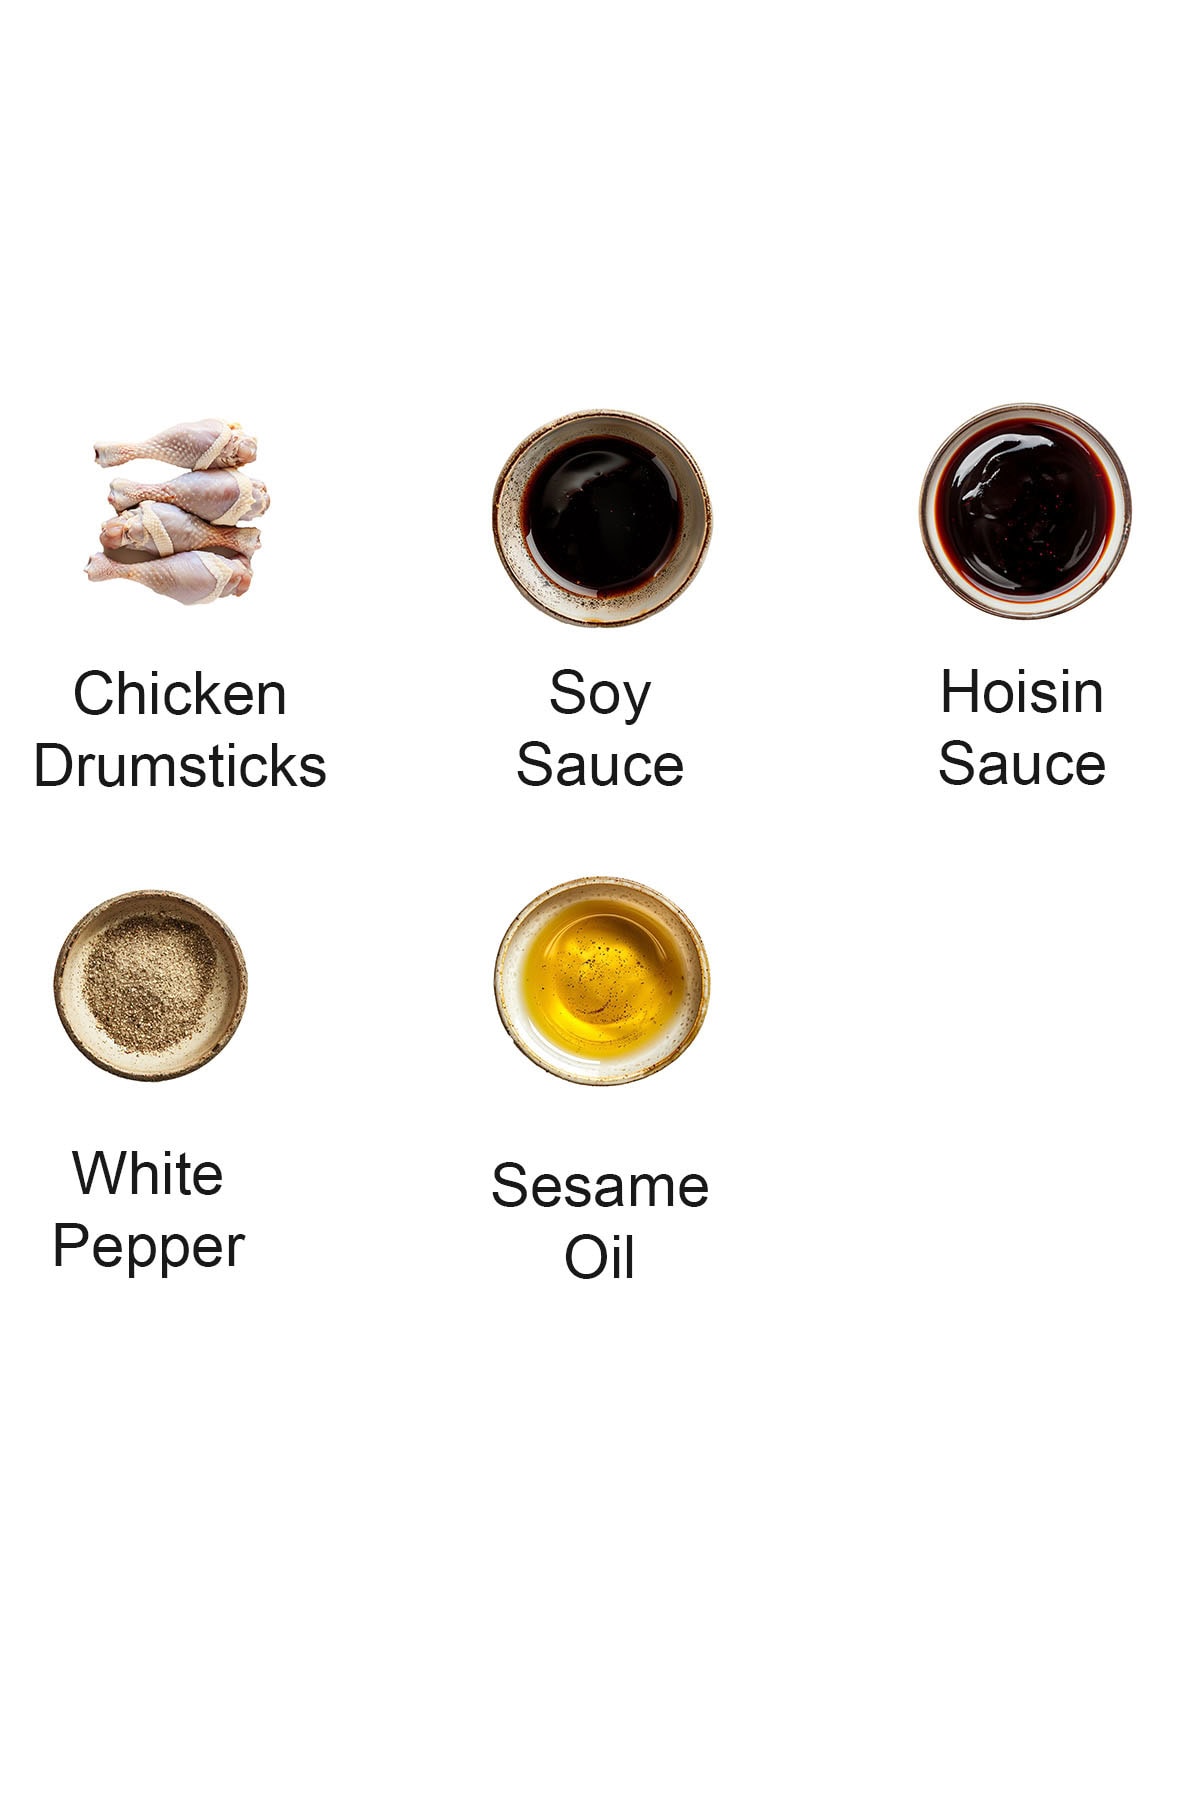 This image shows the ingredients used for the Baked Hoisin Chicken Recipe.